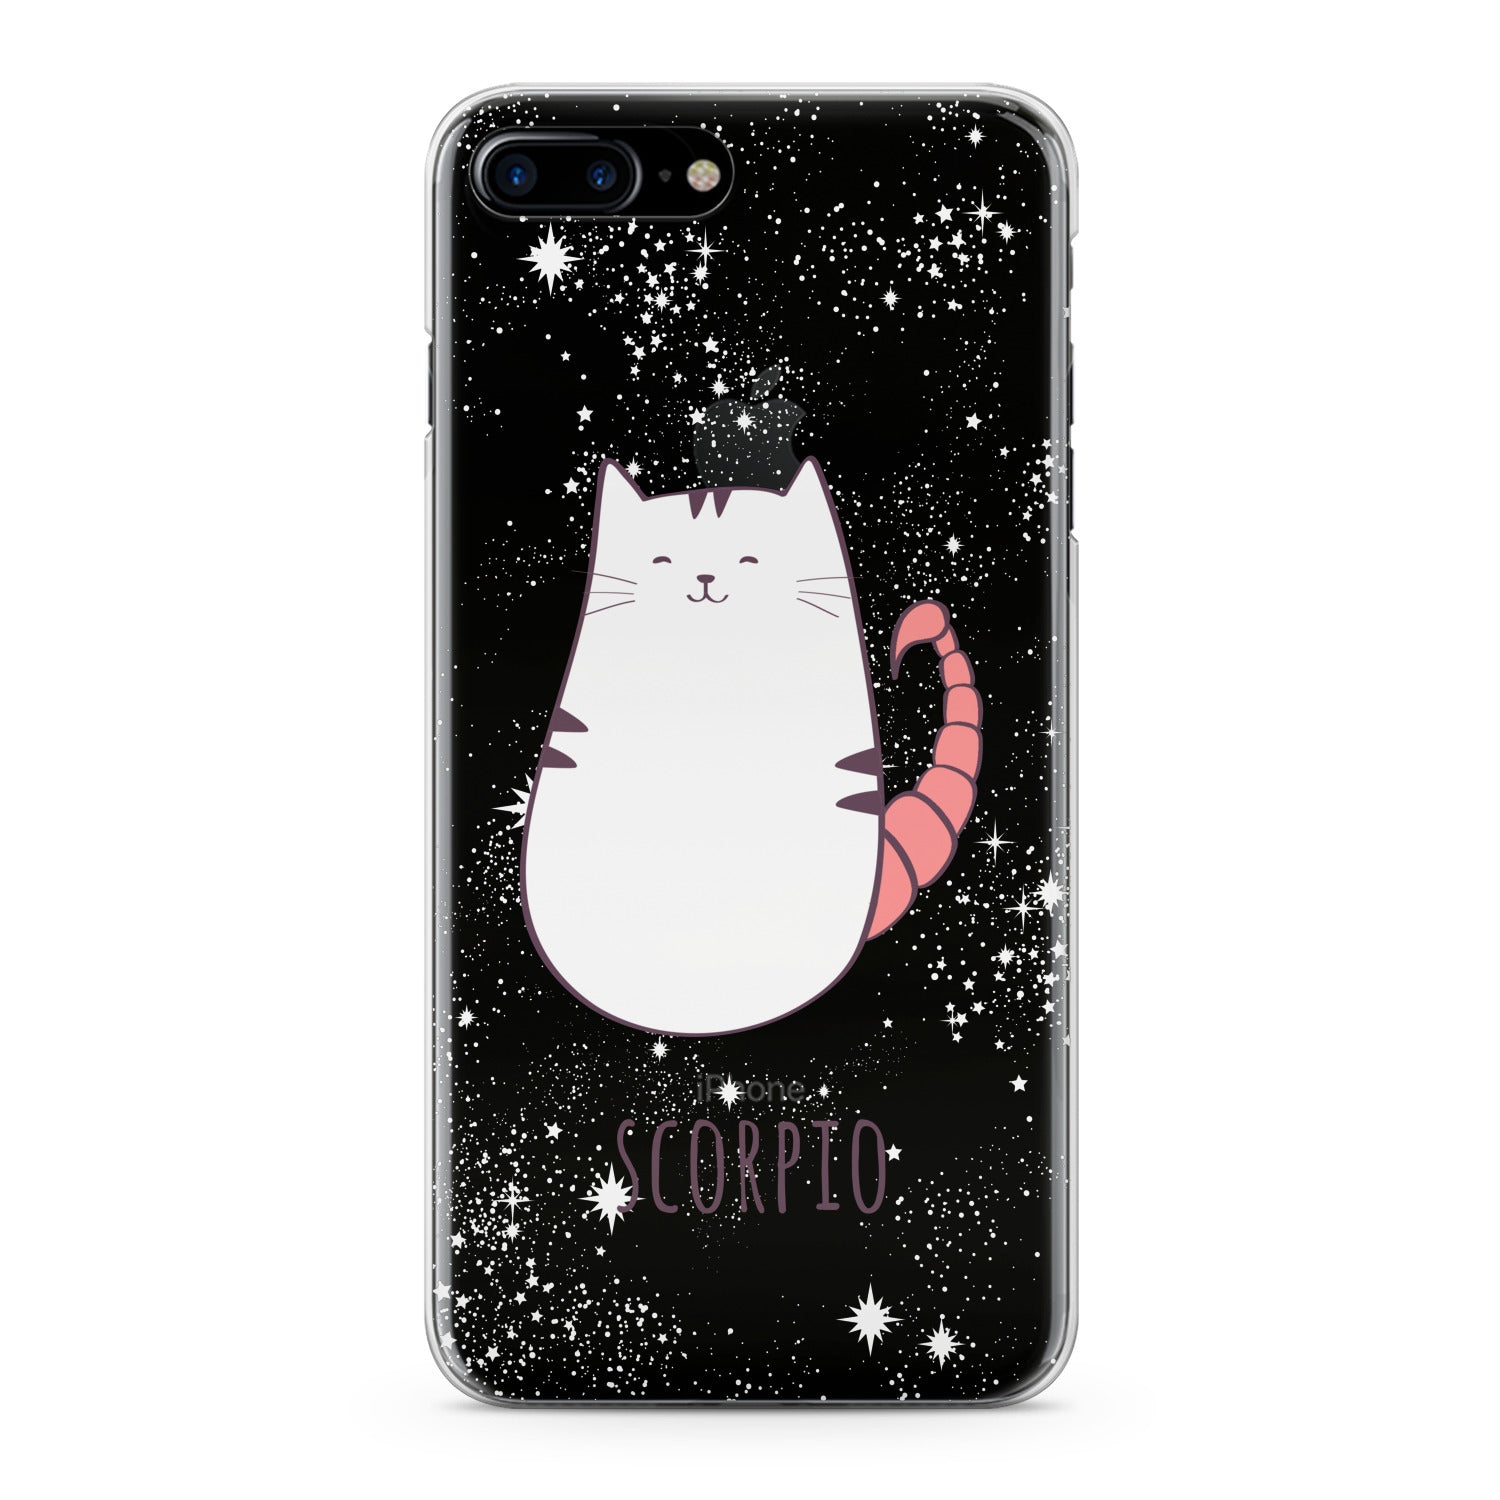 Lex Altern Scorpio Phone Case for your iPhone & Android phone.